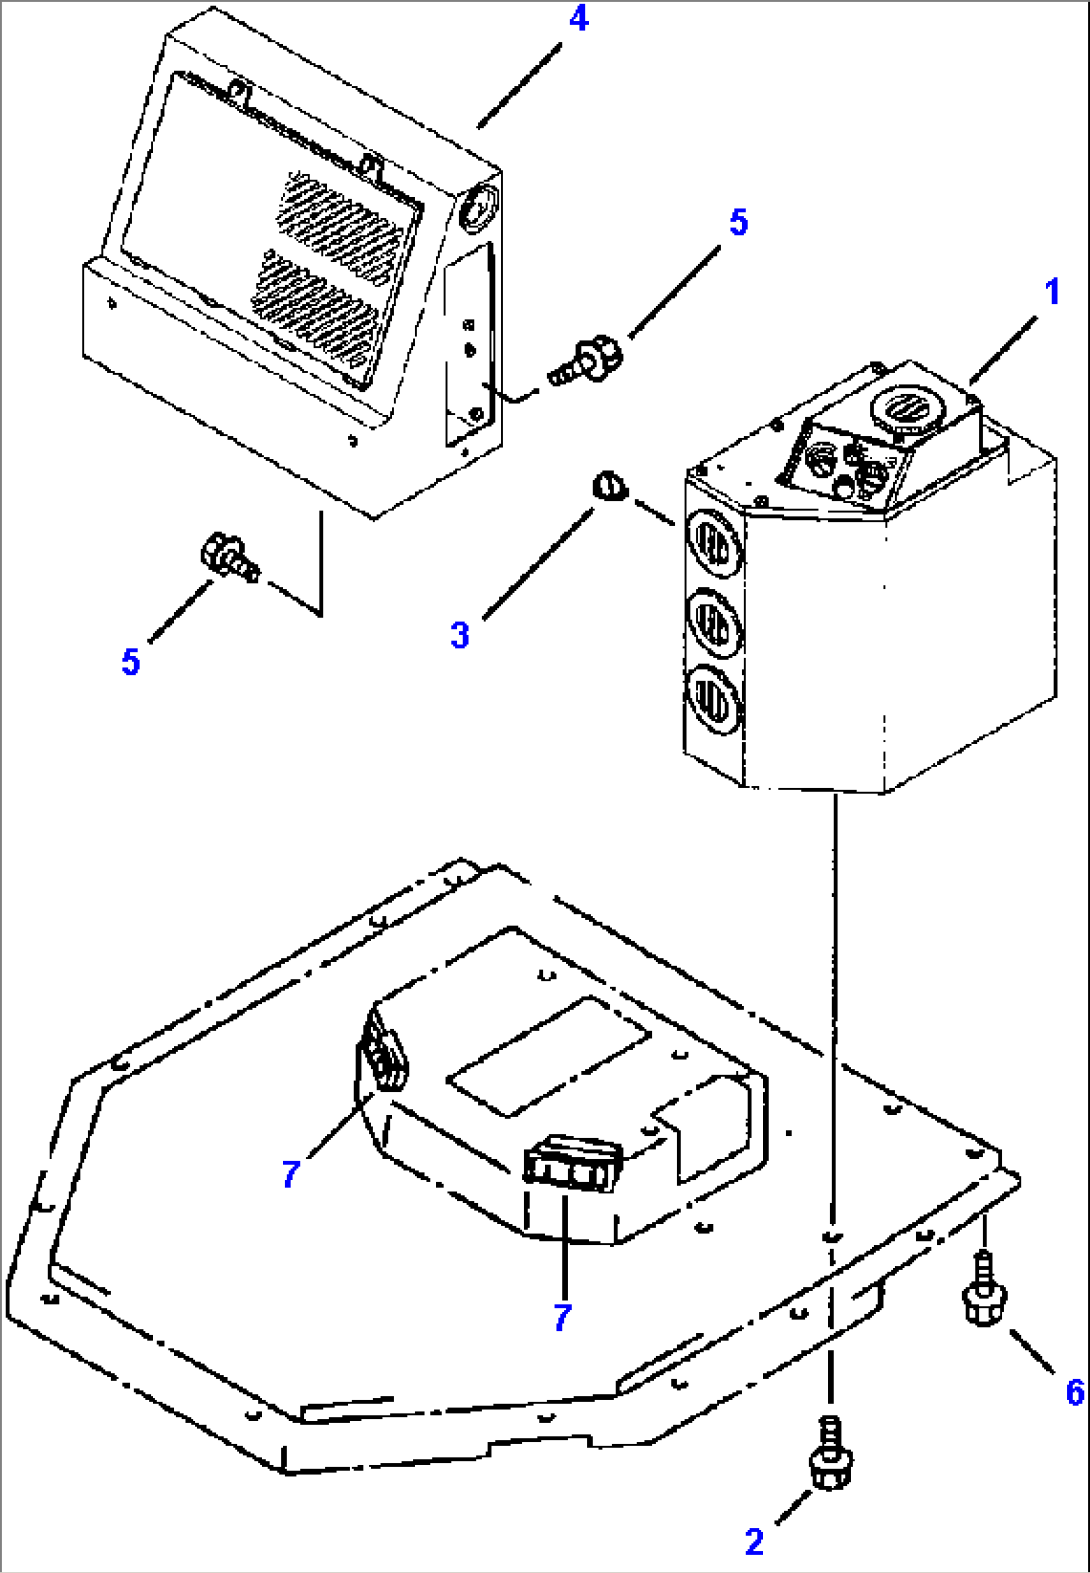 FIG NO. 5591 HEATER DEFROSTER - S/N 3053 AND UP OPERATORS COMPARTMENT